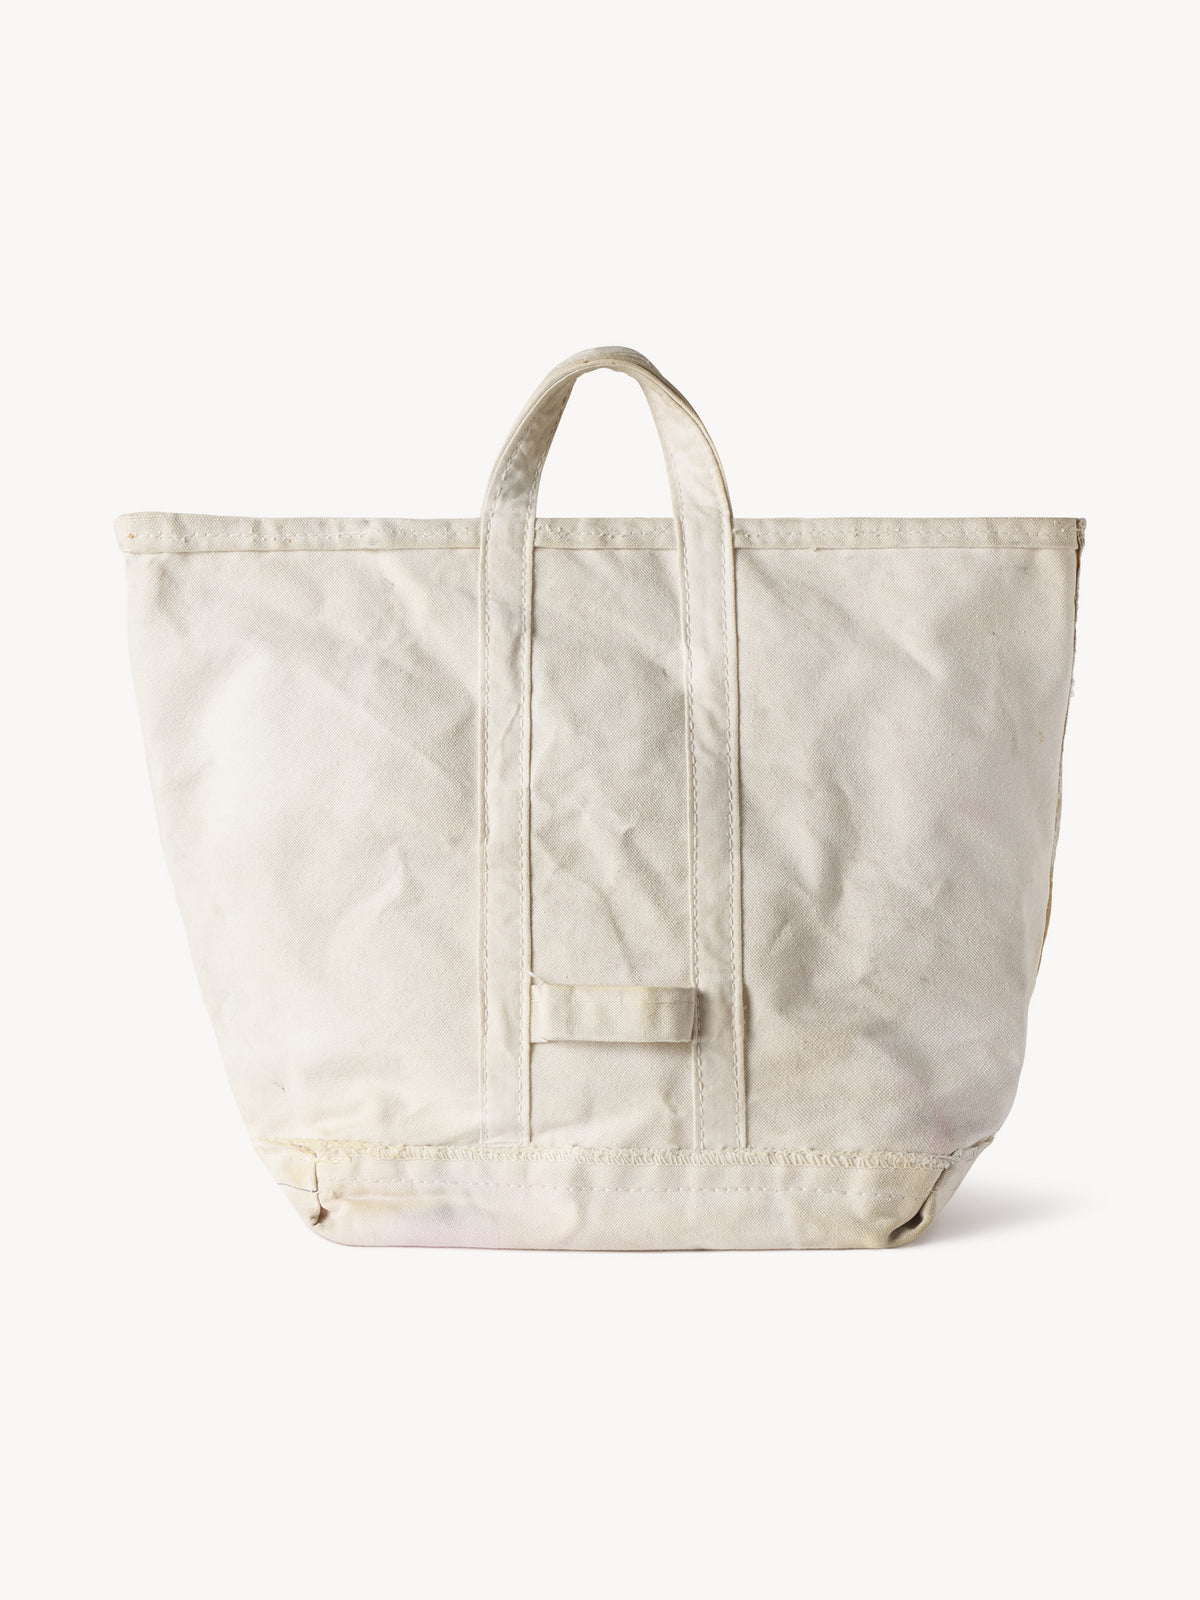 Off-White Canvas Bag - 0171 - Product Flat